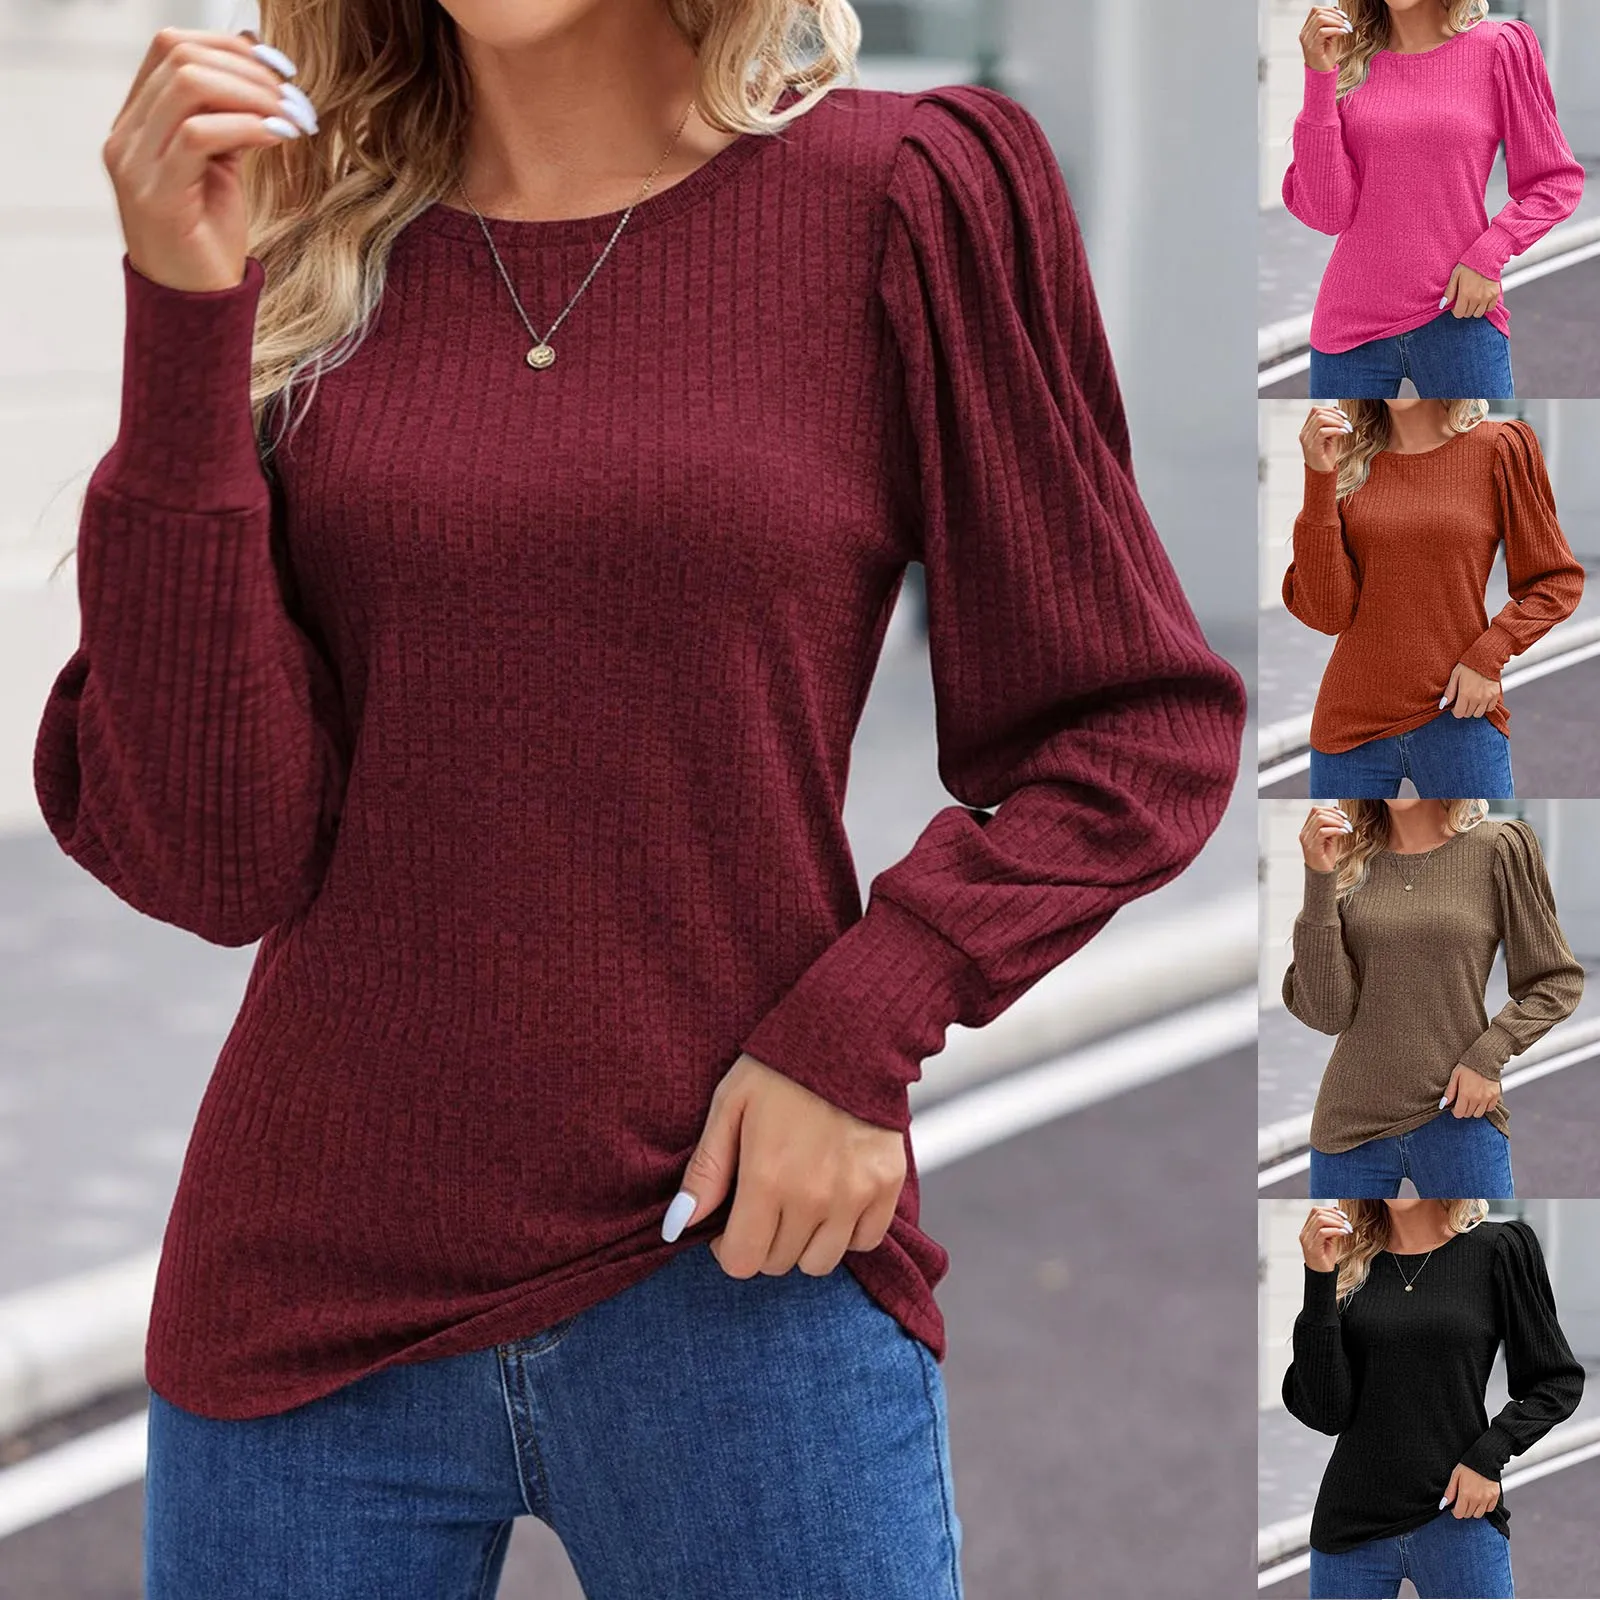 

Lightweight Ribbed Kintted Soft Sweaters Elegant Female Smocked Long Sleeve Crew Neck Warm Undershirts Winter Knitwear Jumper